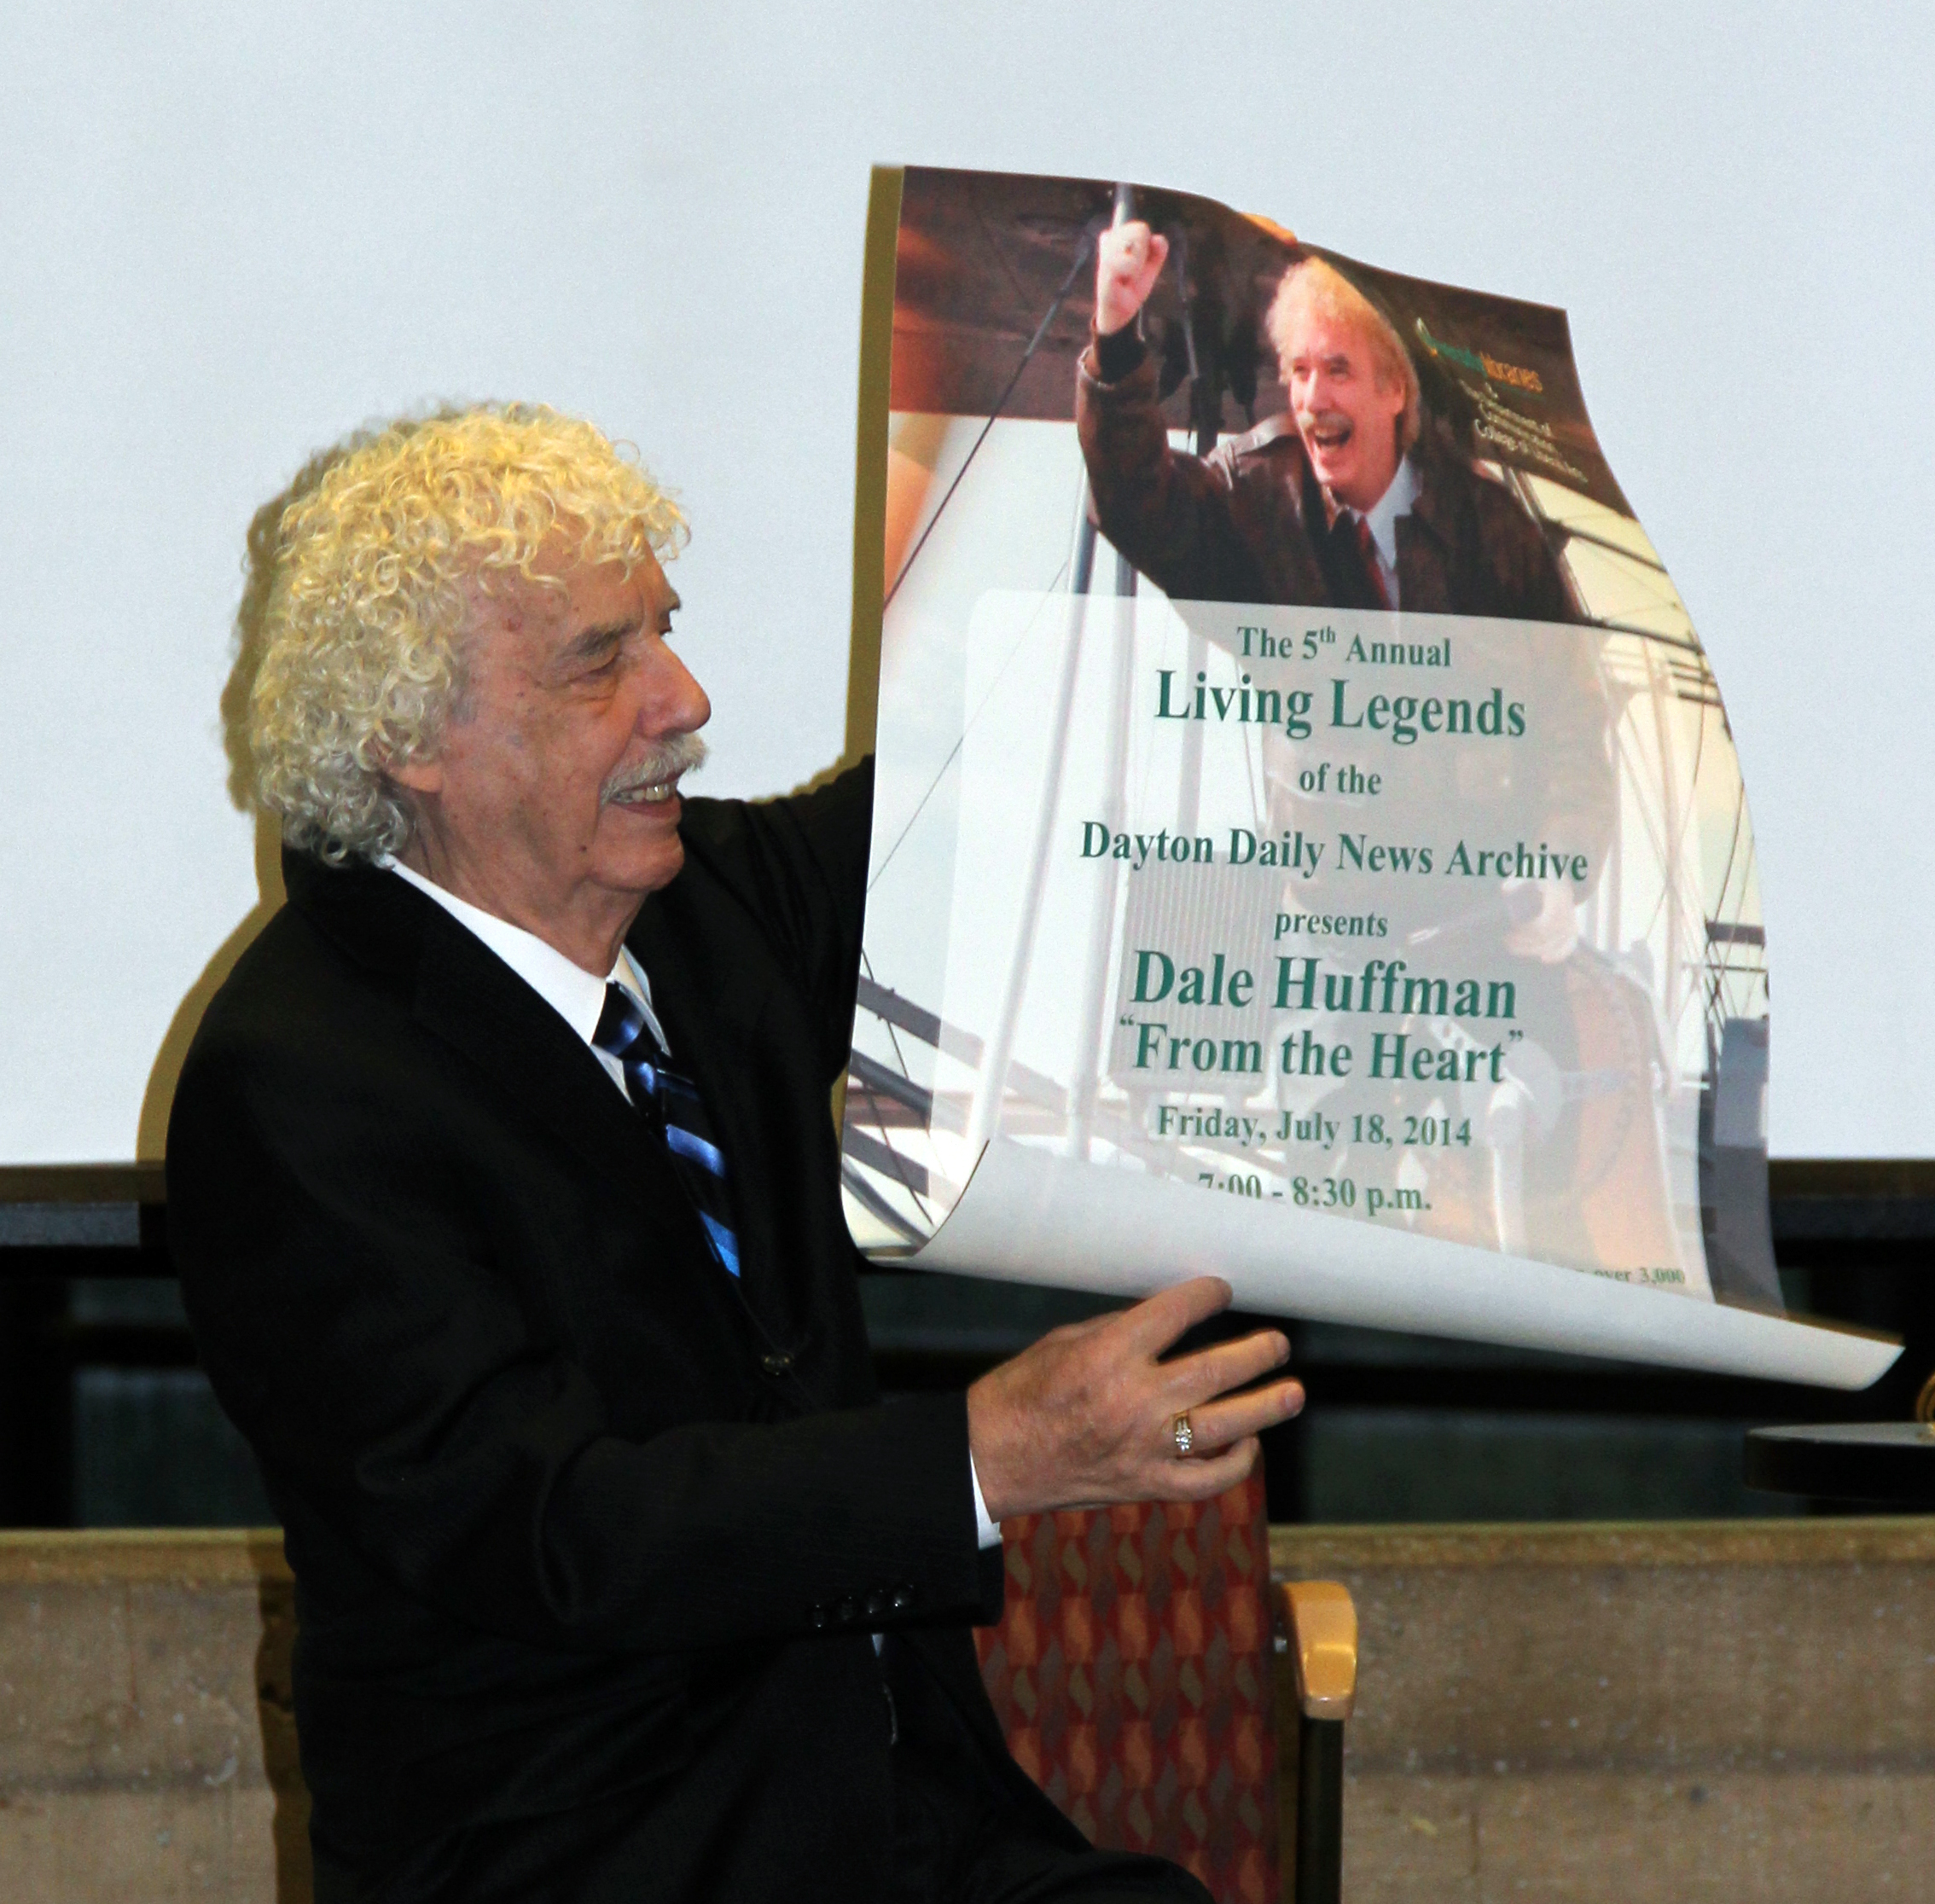 Dale Huffman was honored at our 5th annual Living Legends of the Dayton Daily News Archives event in July 2014.